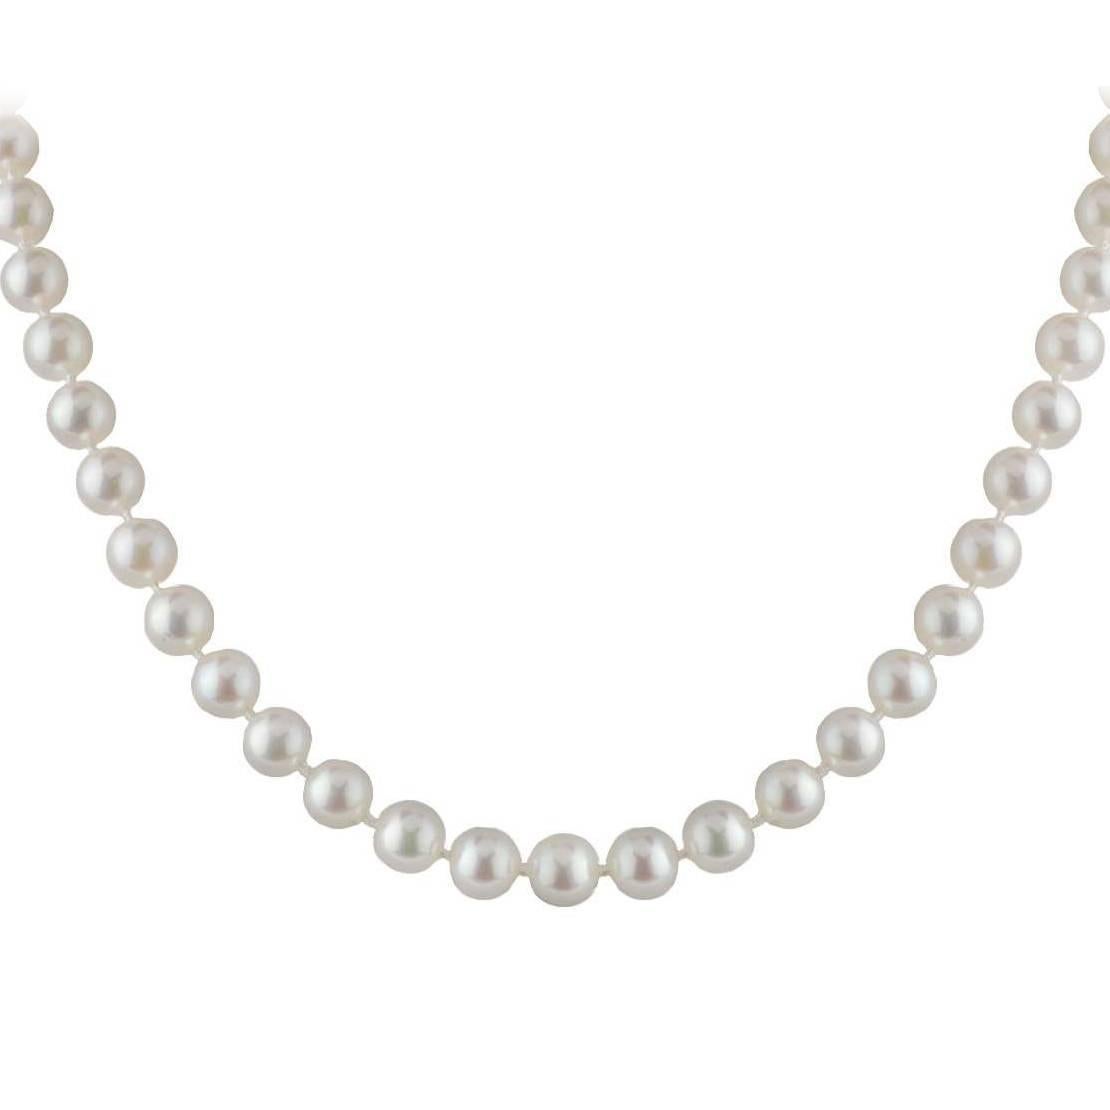 Tiffany & Co. Pearl Necklace